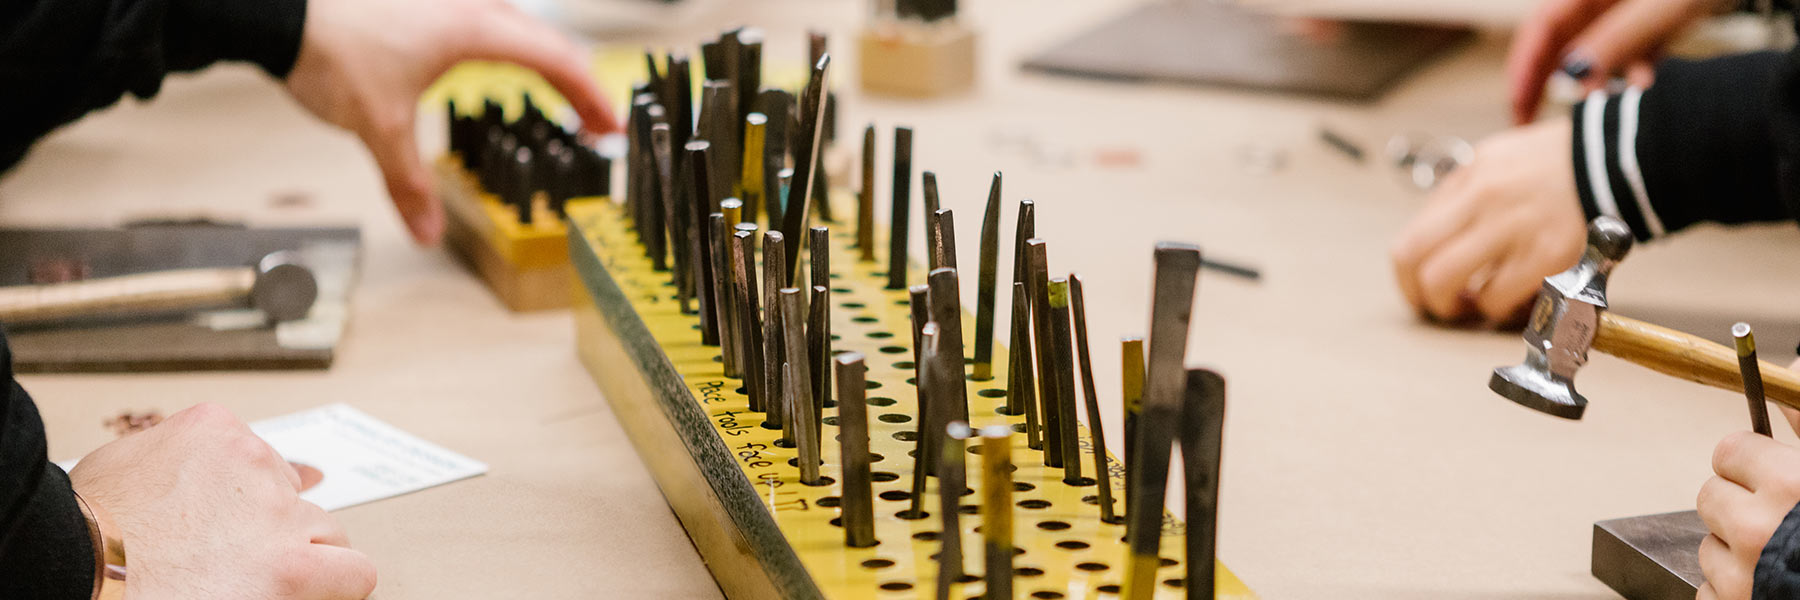 A row of metal tools on a table.